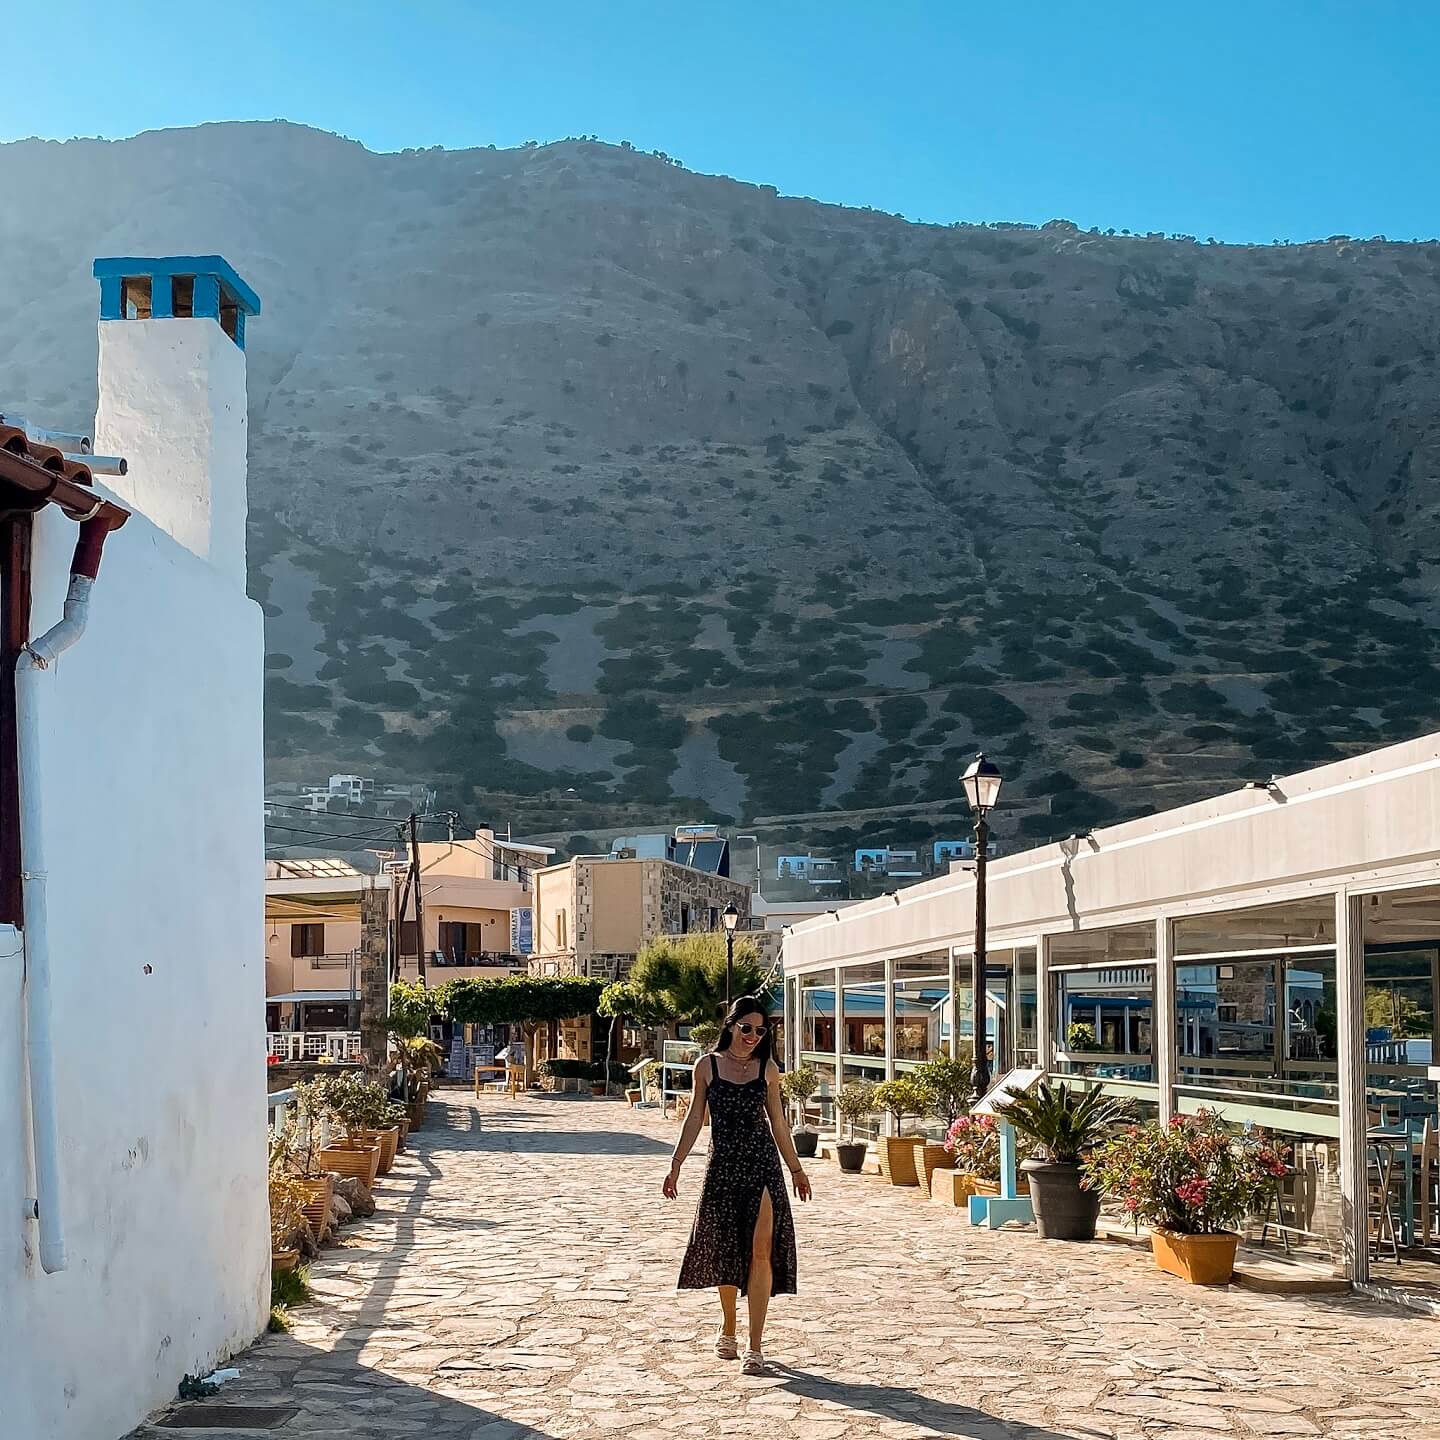 Stella walking in Plaka Crete streets with mountain behind her